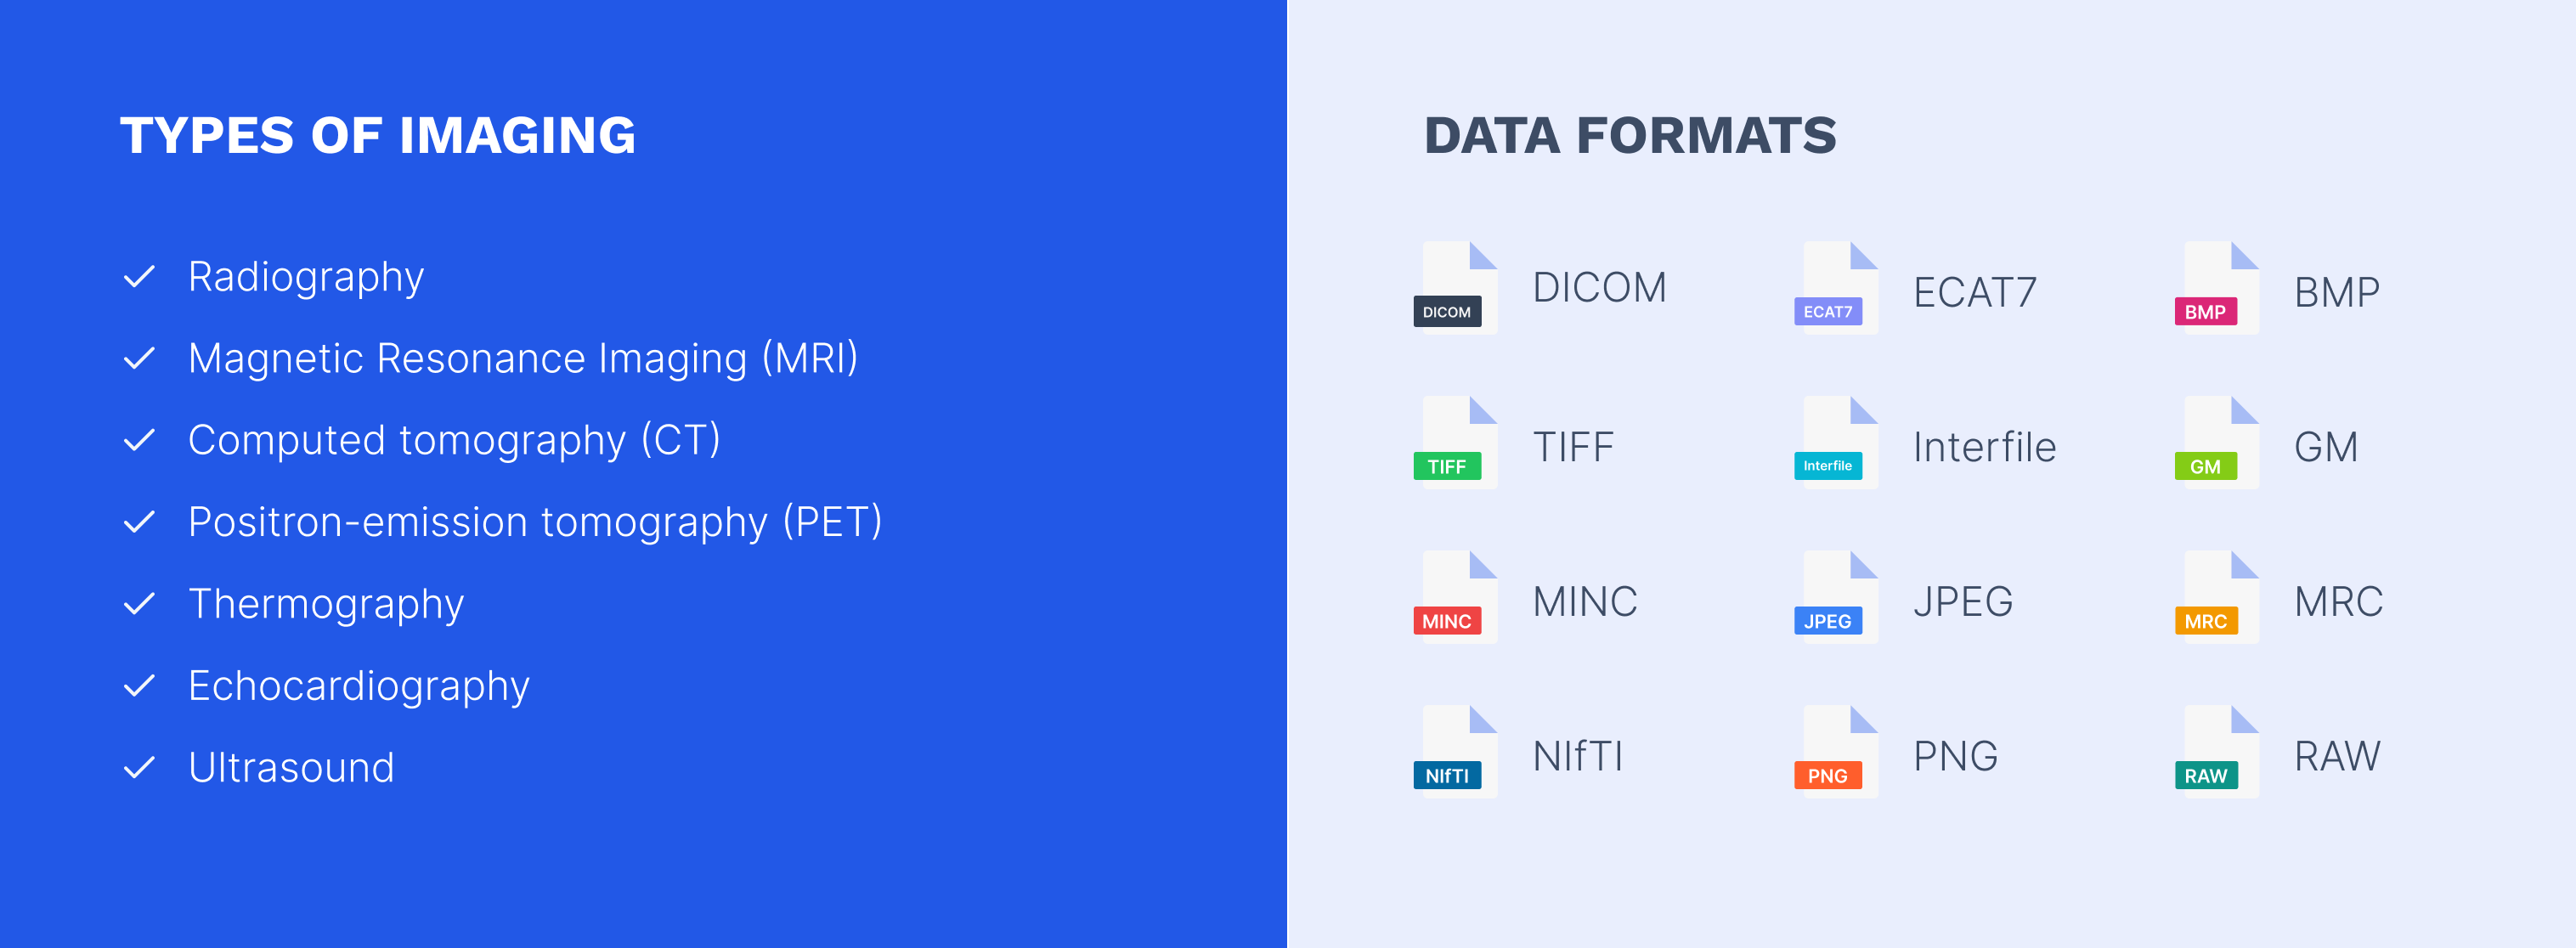 Our developed applications will support the following data formats: DICOM, TIFF, MINC, NIfTI, ECAT7 and other